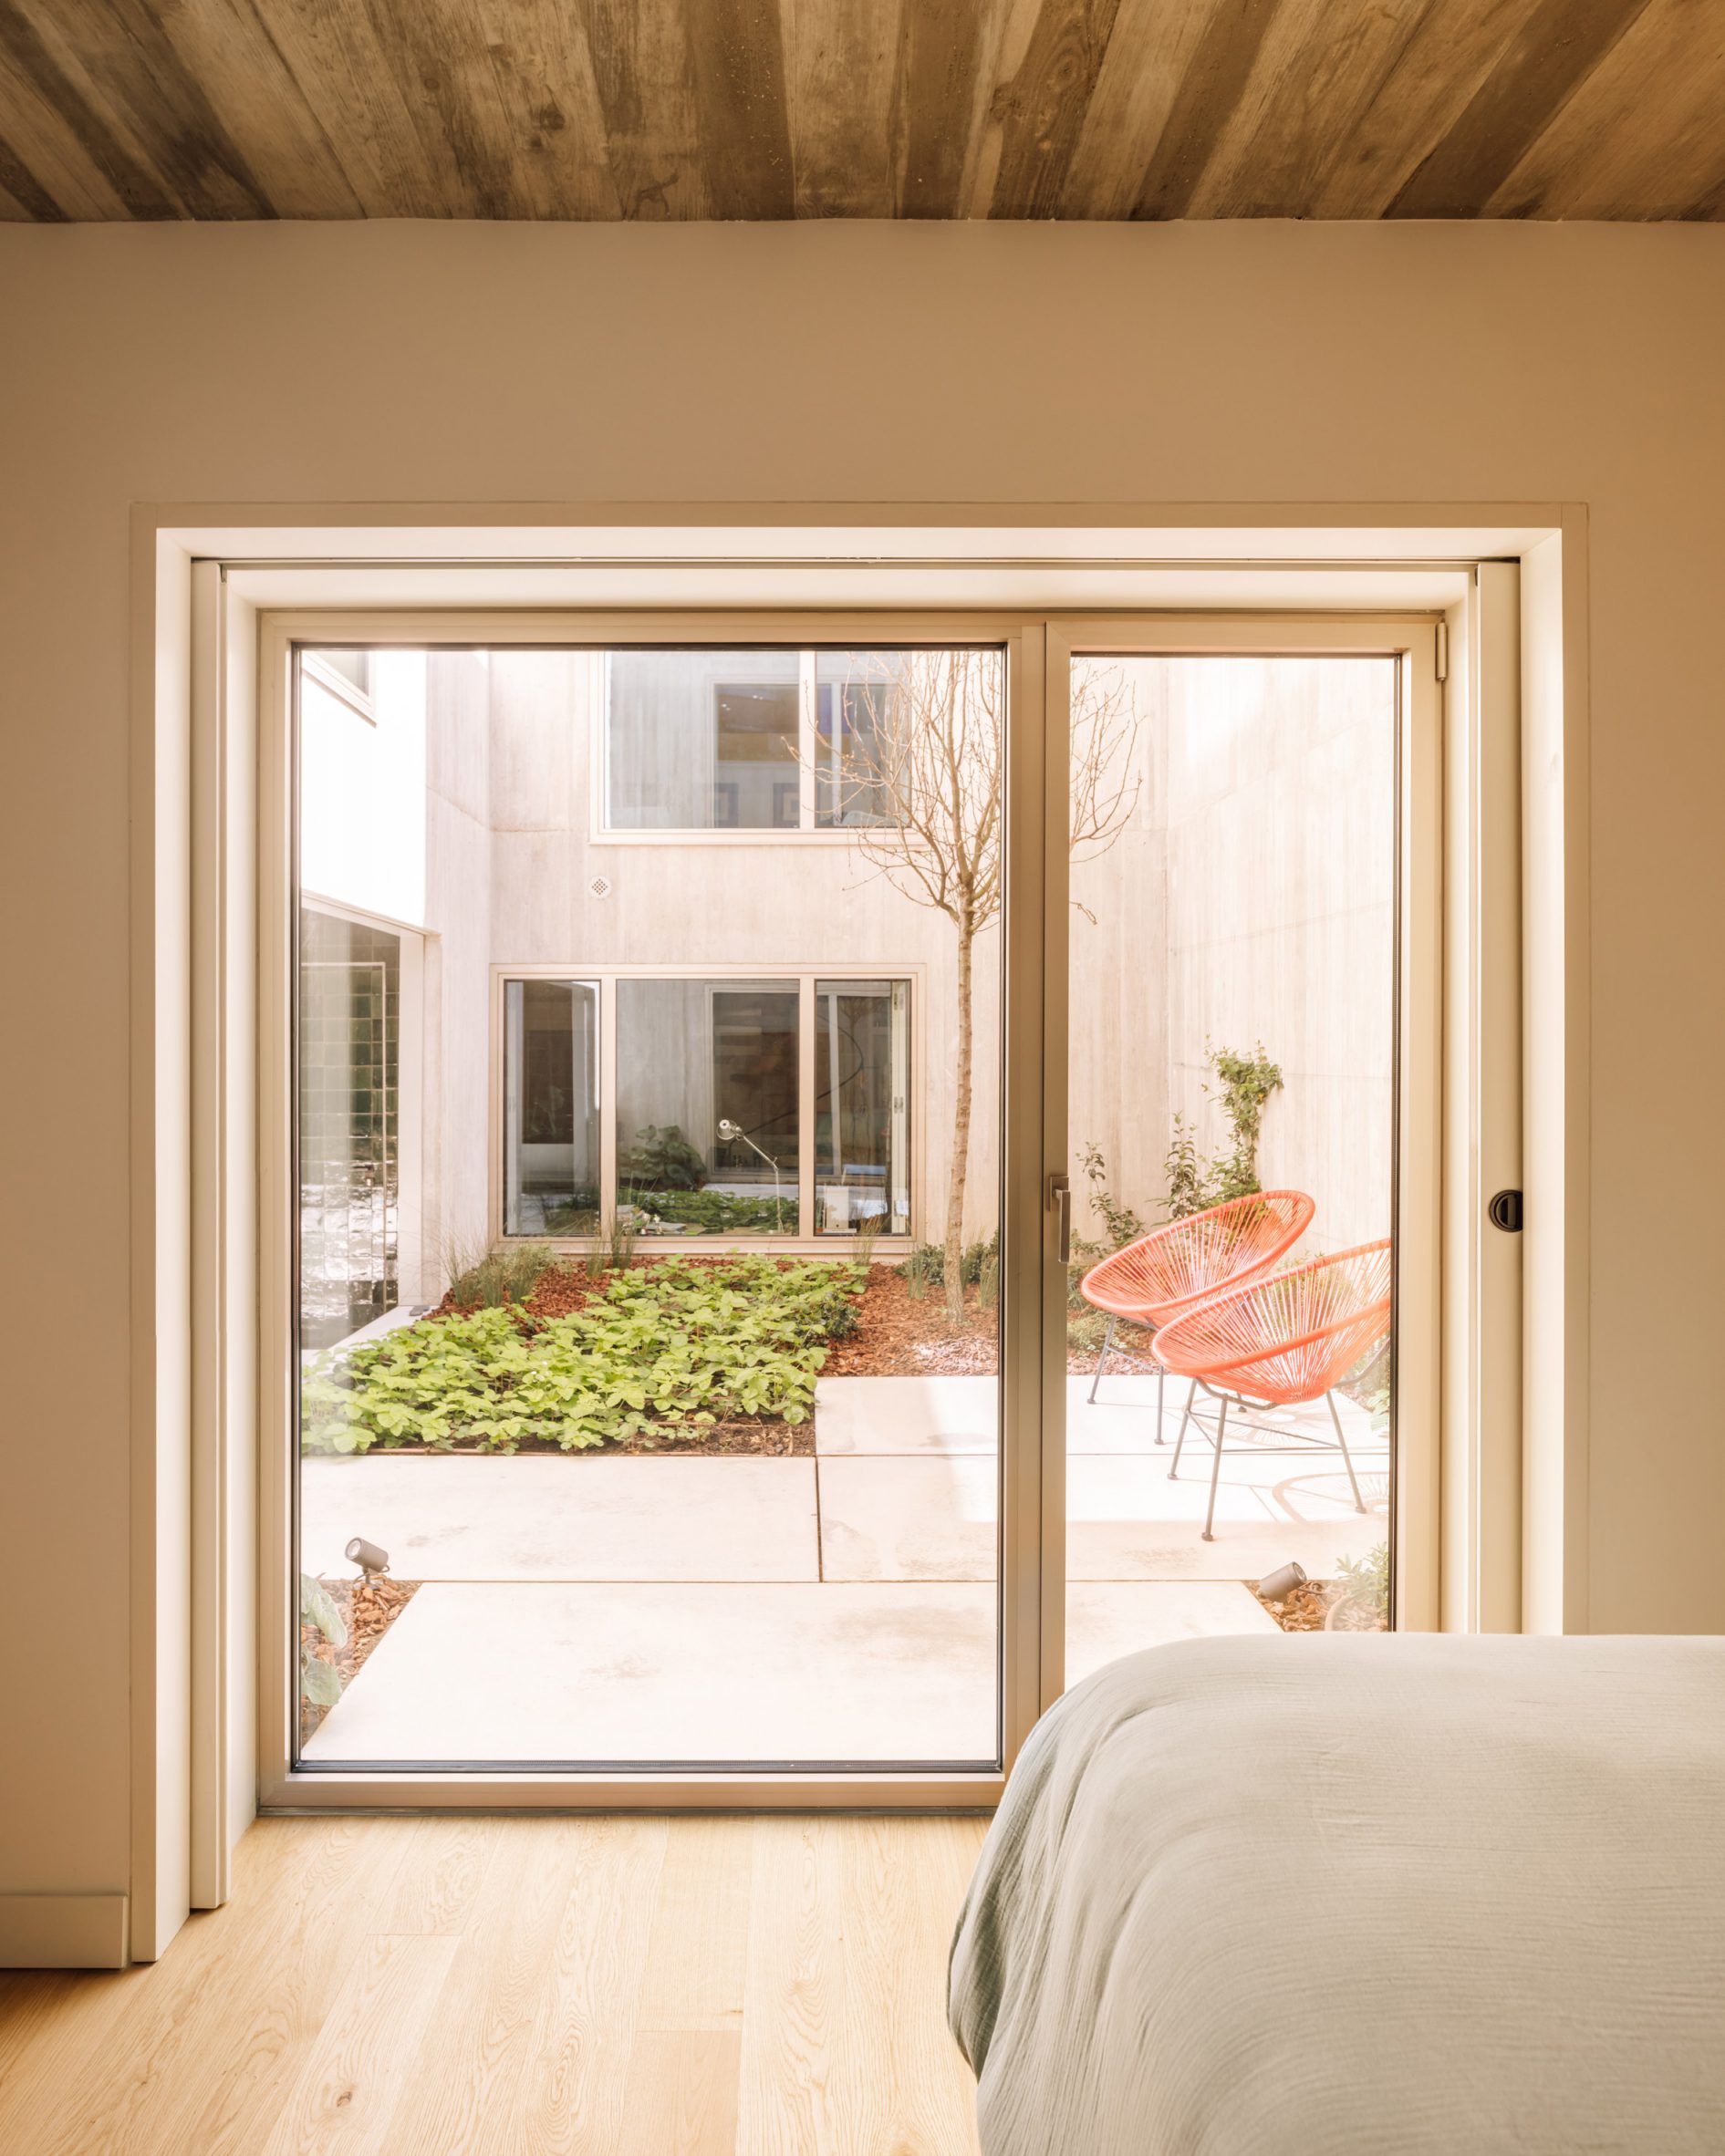 Bedroom with glazed patio doors leading to a courtyard